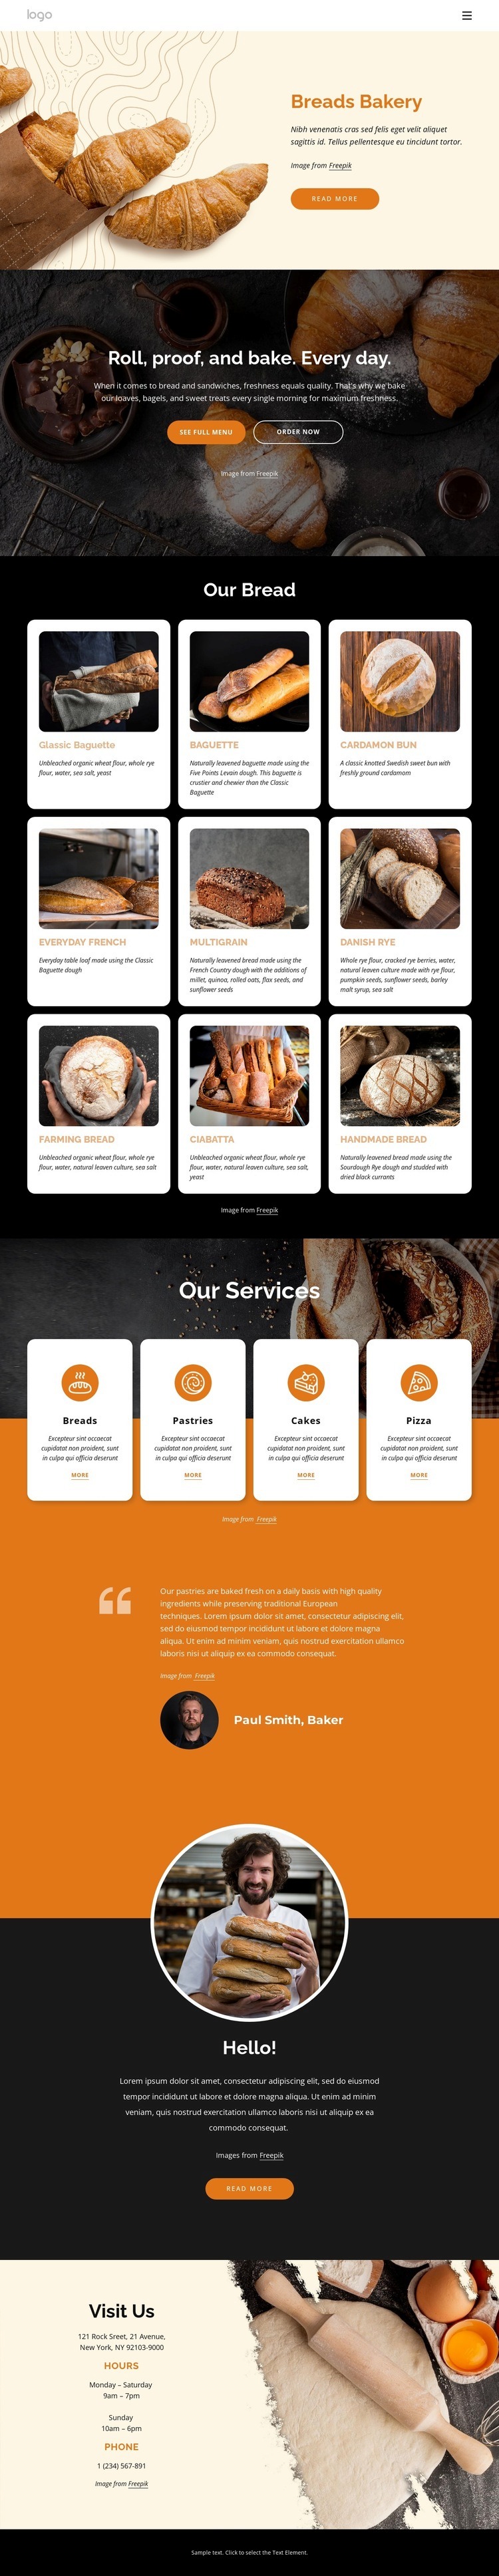 Classic baked goods Homepage Design